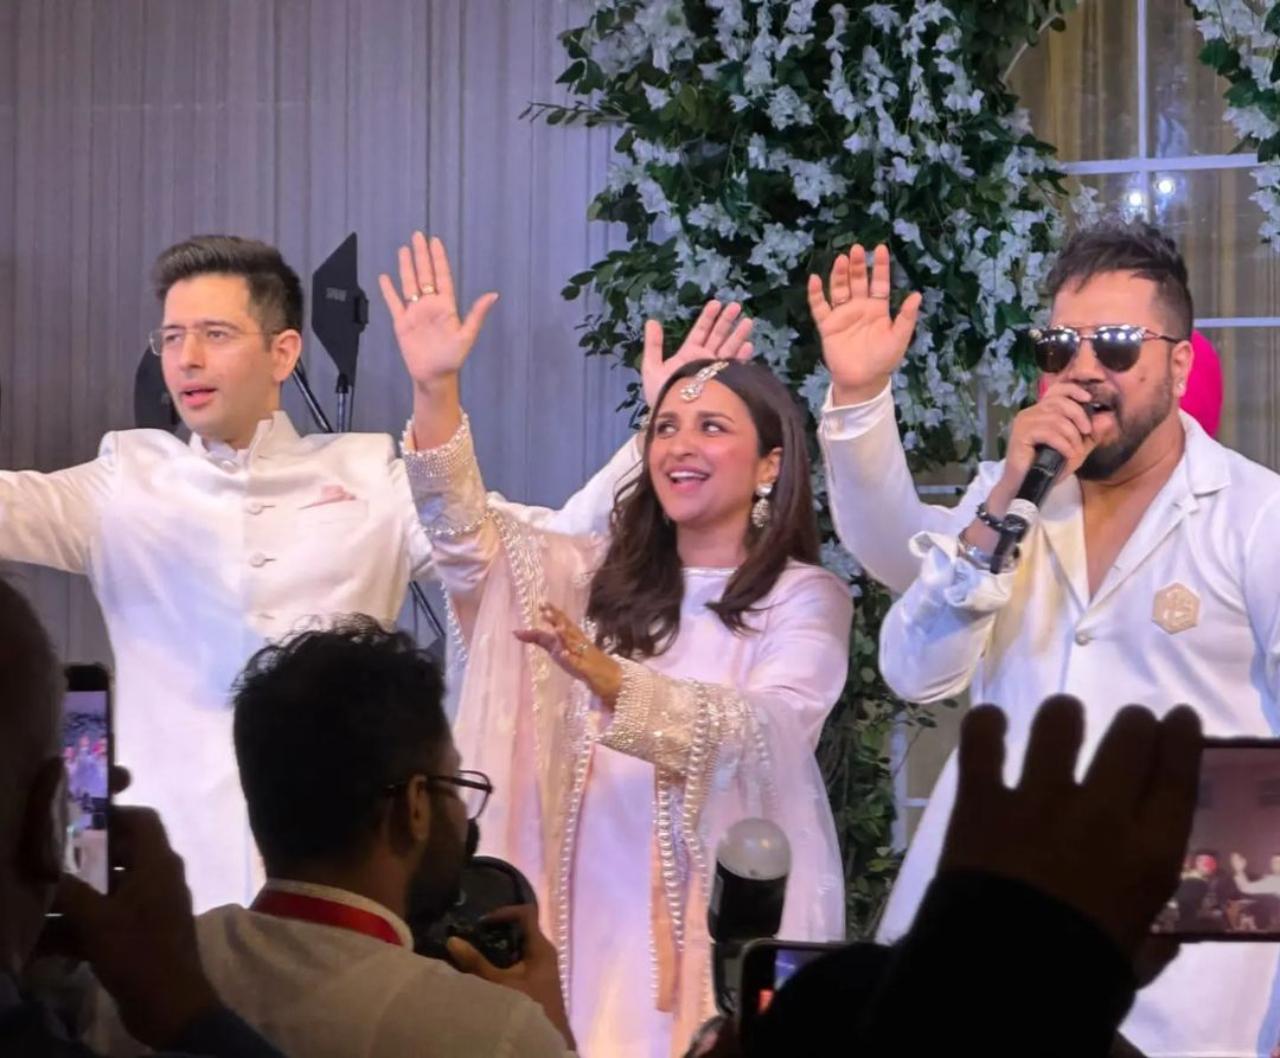 Singer Mika Singh performed live at the ceremony. Parineeti and Raghav were seen grooving to his music